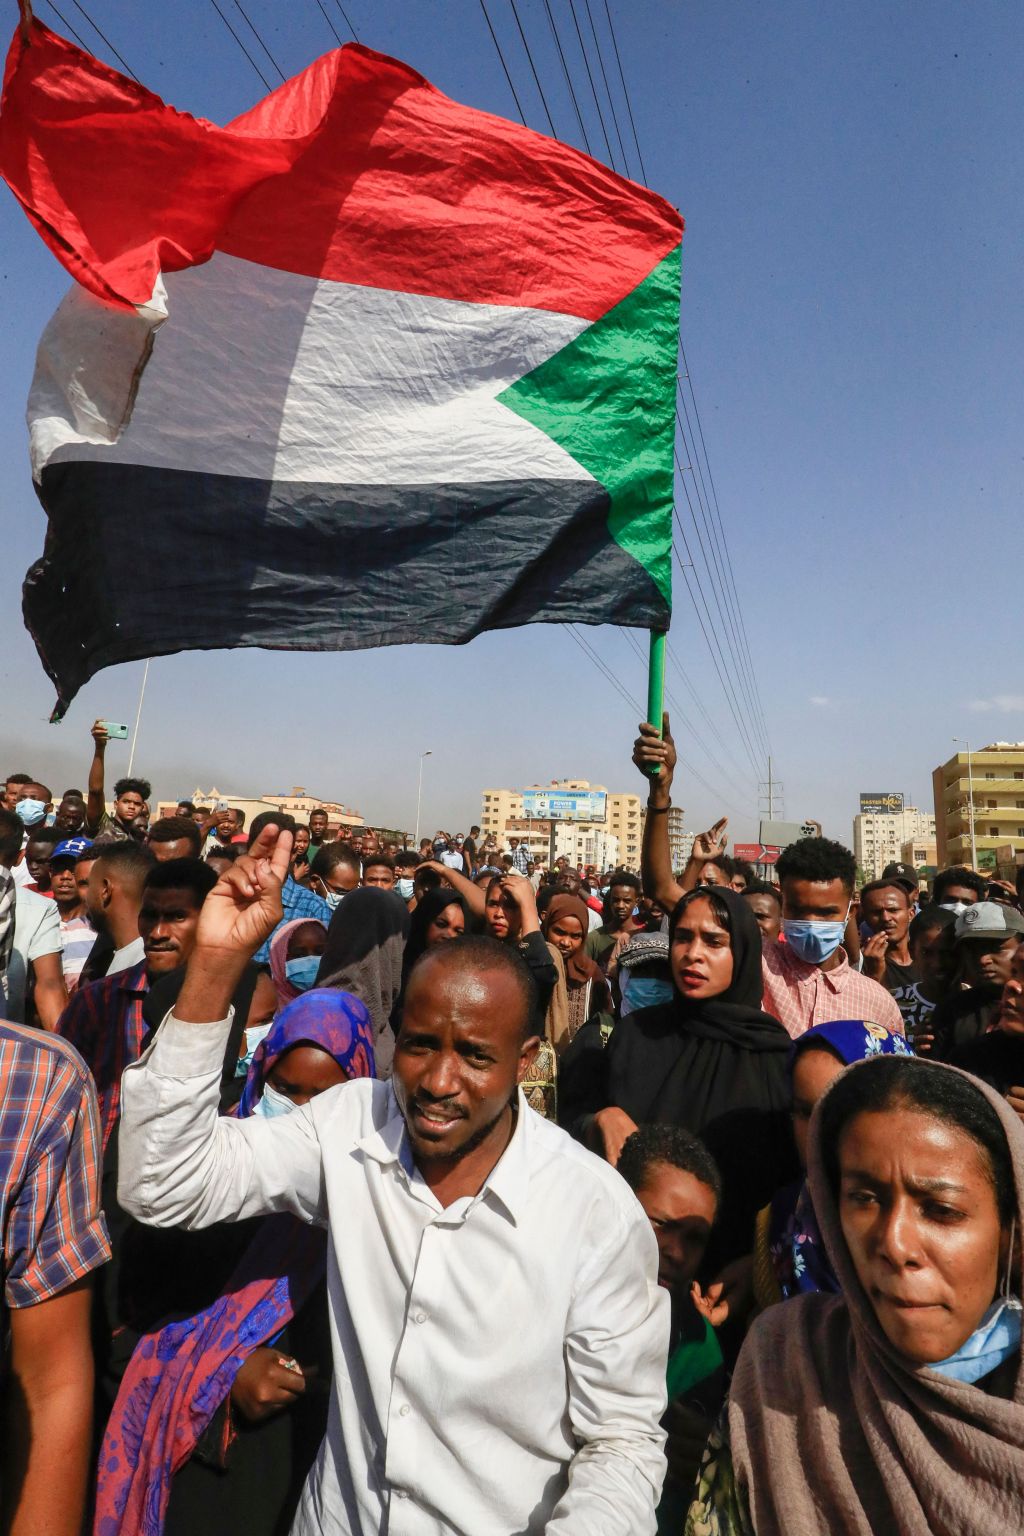 Photos: Sudanese protesters flood streets amid reports of possible military coup